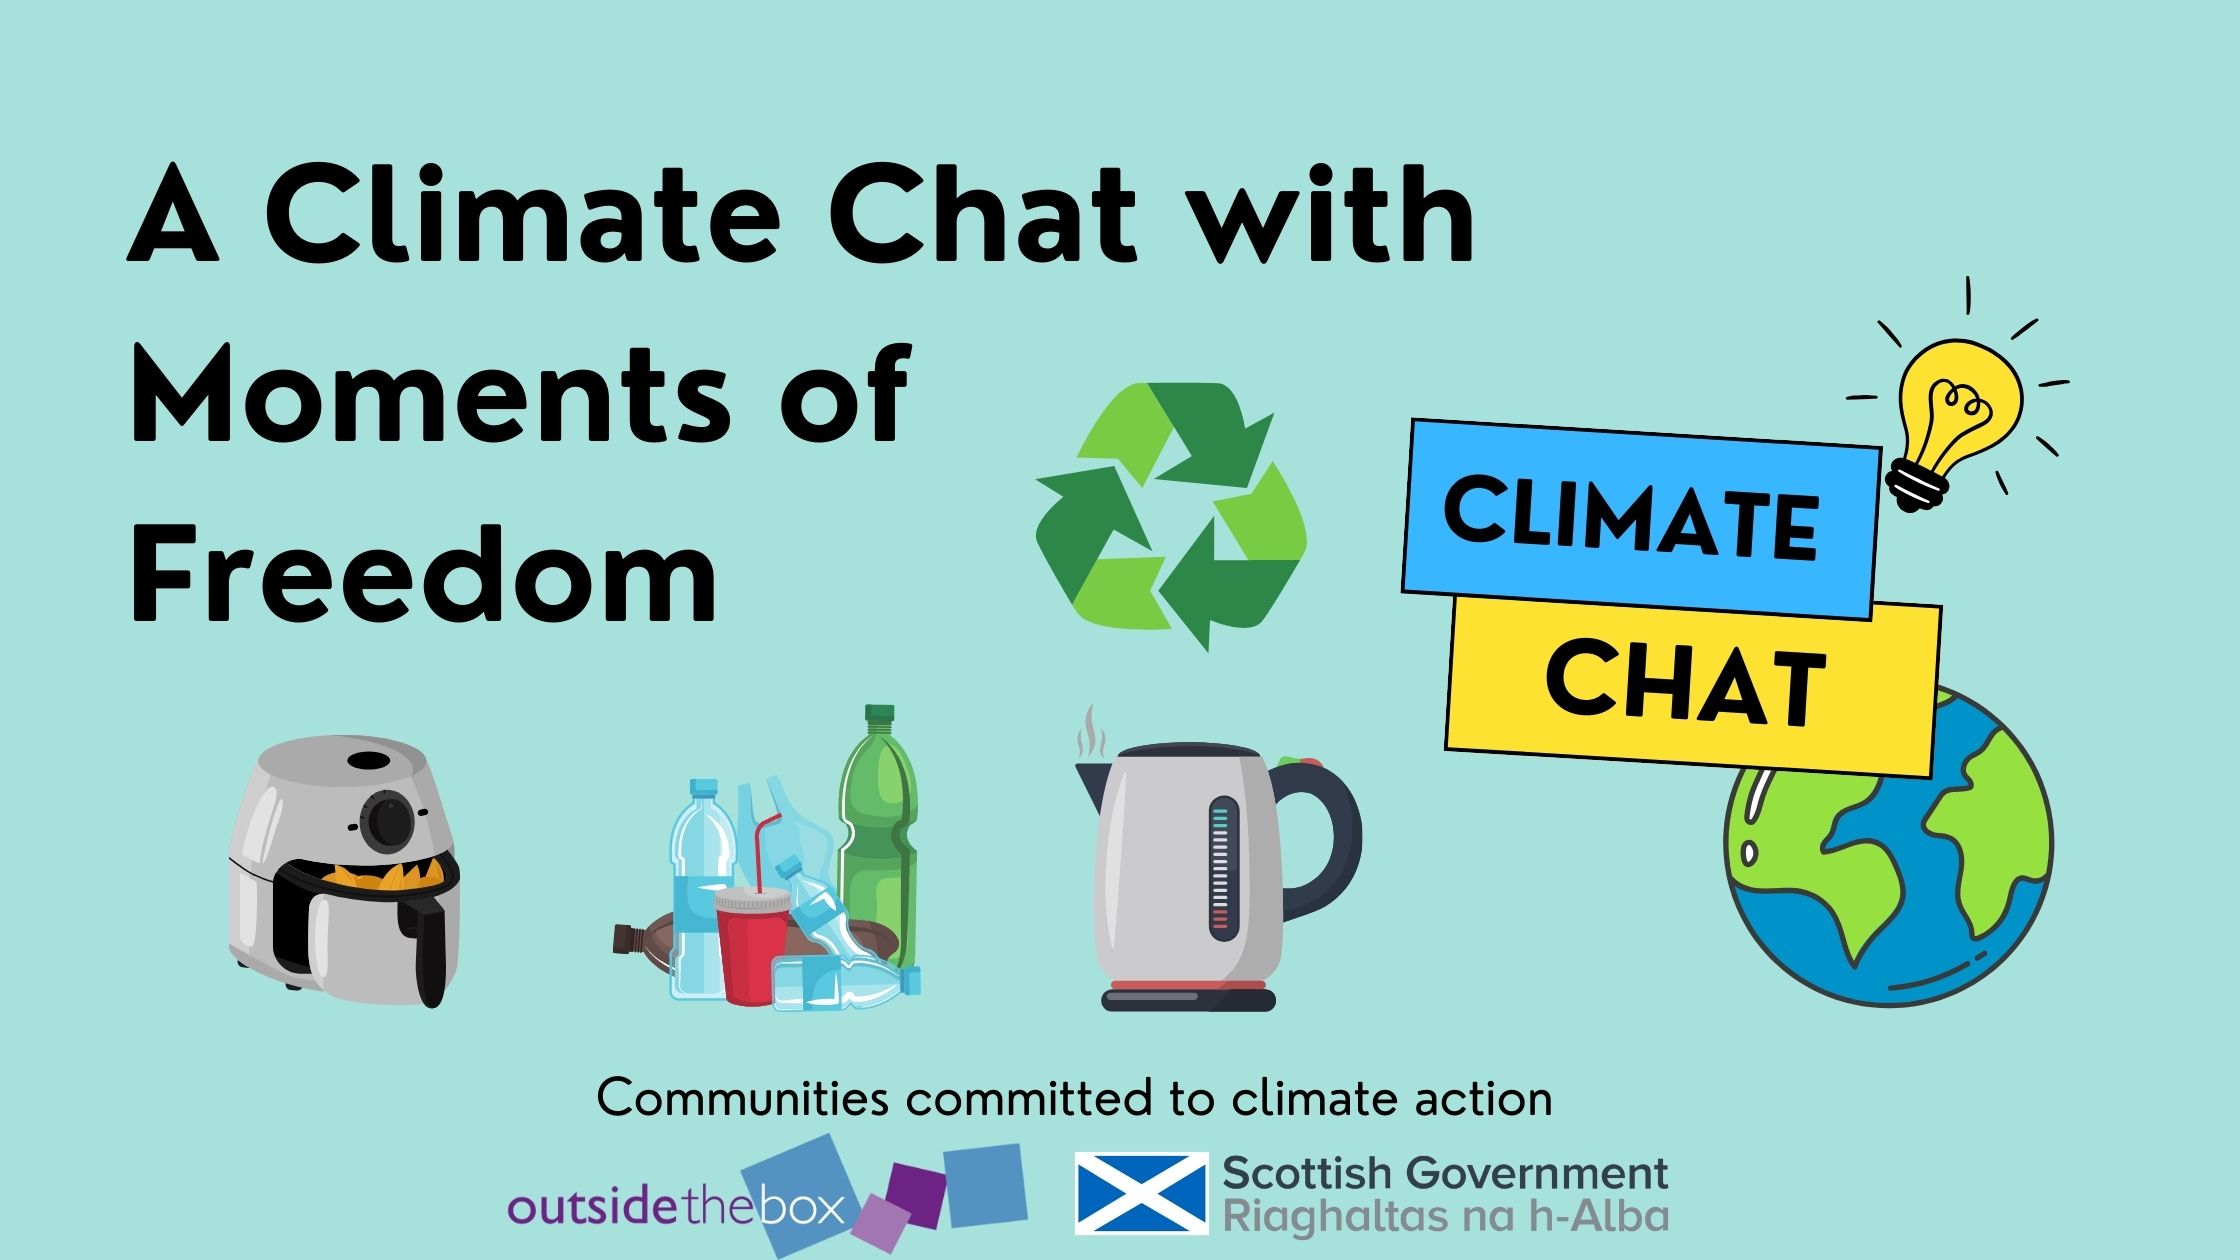 A Climate Chat with Moments of Freedom